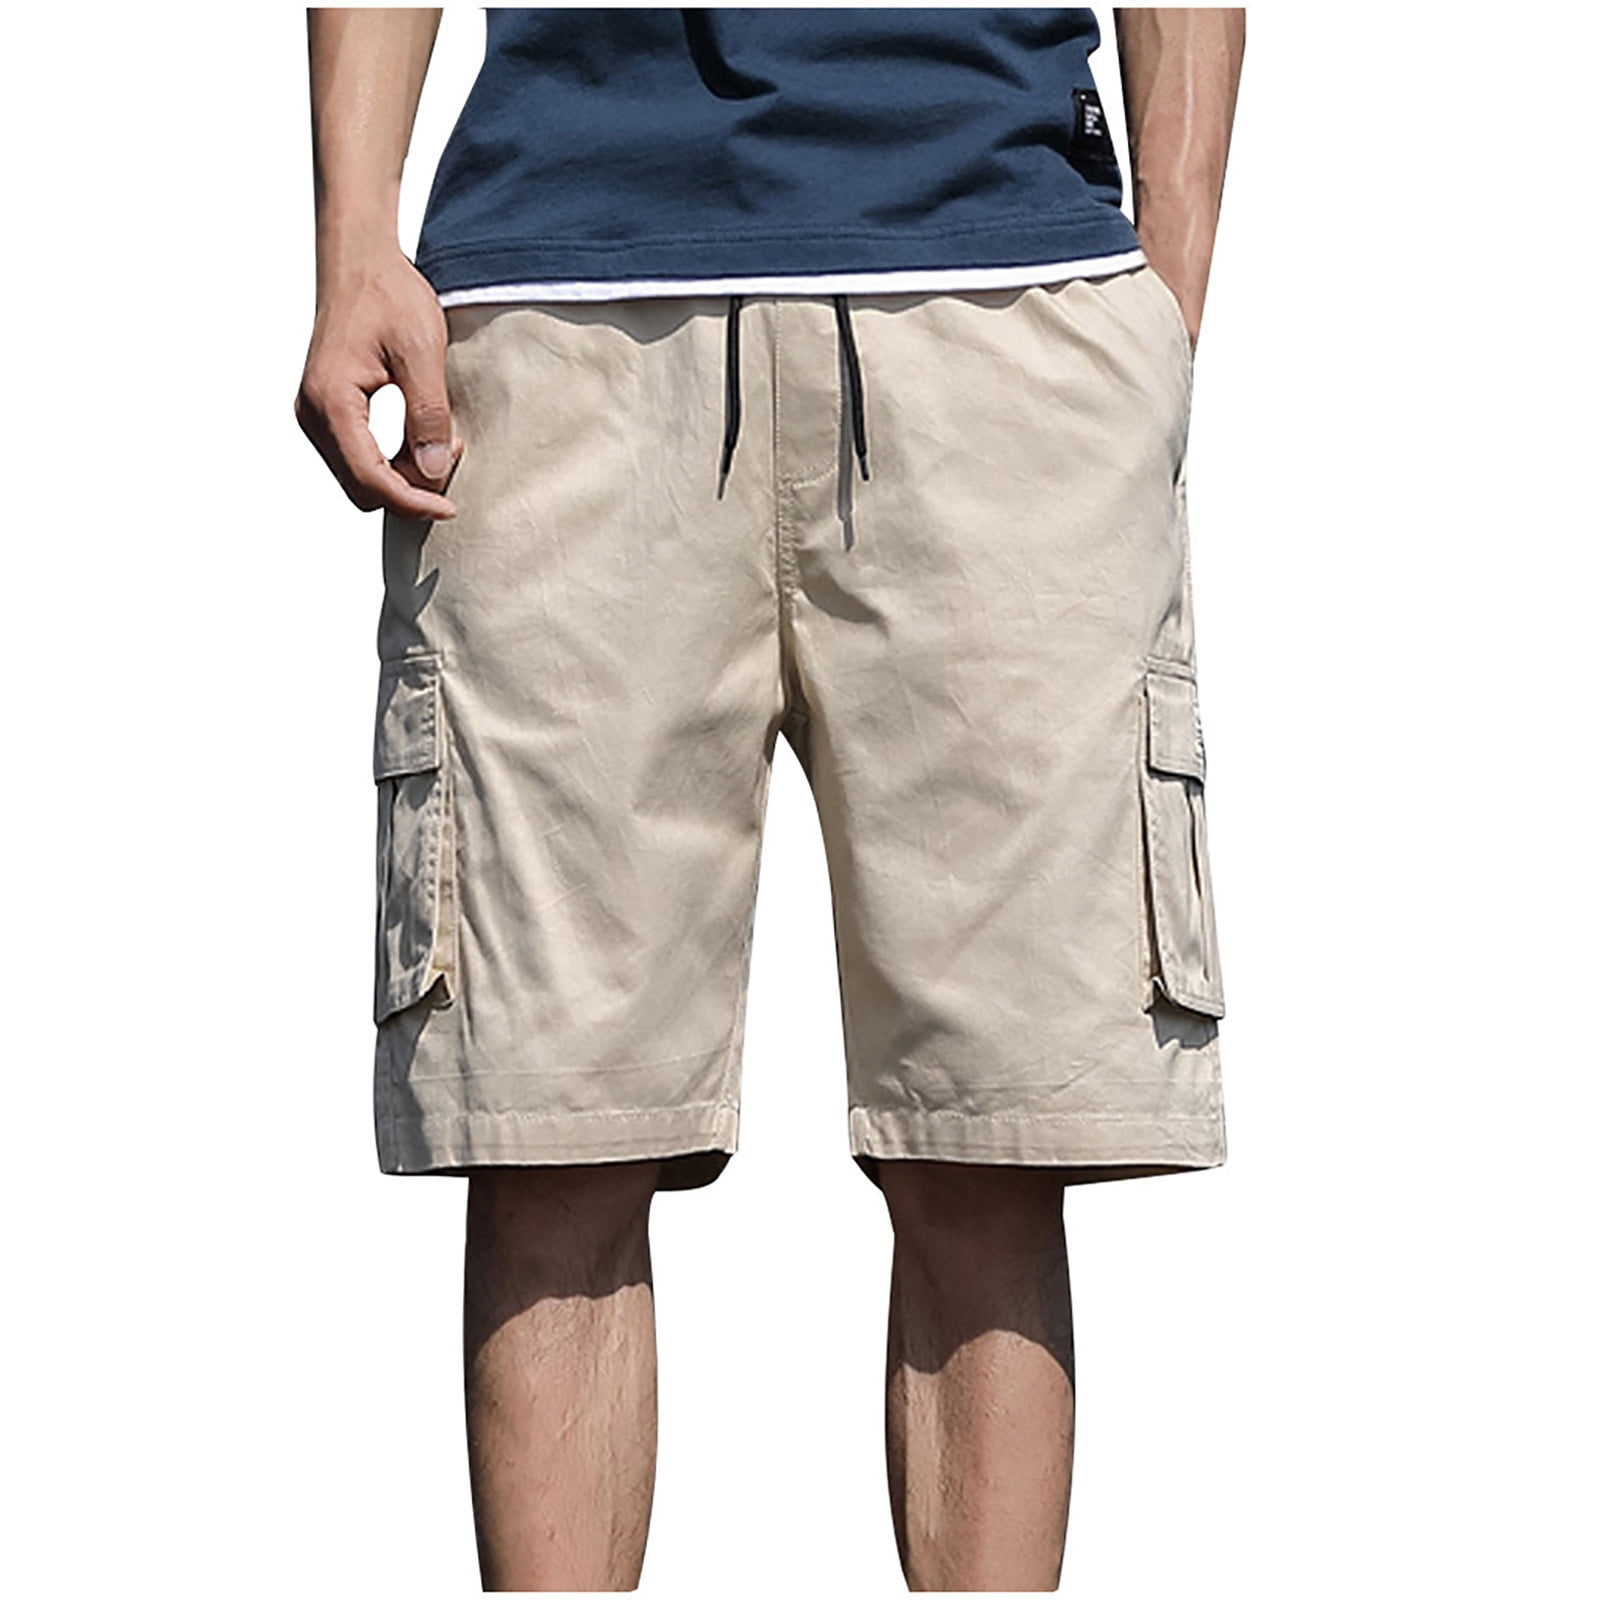 G Gradual Men's Cargo Shorts with Belt Lightweight Breathable Quick Dry  Hiking Tactical Shorts Nylon Spandex